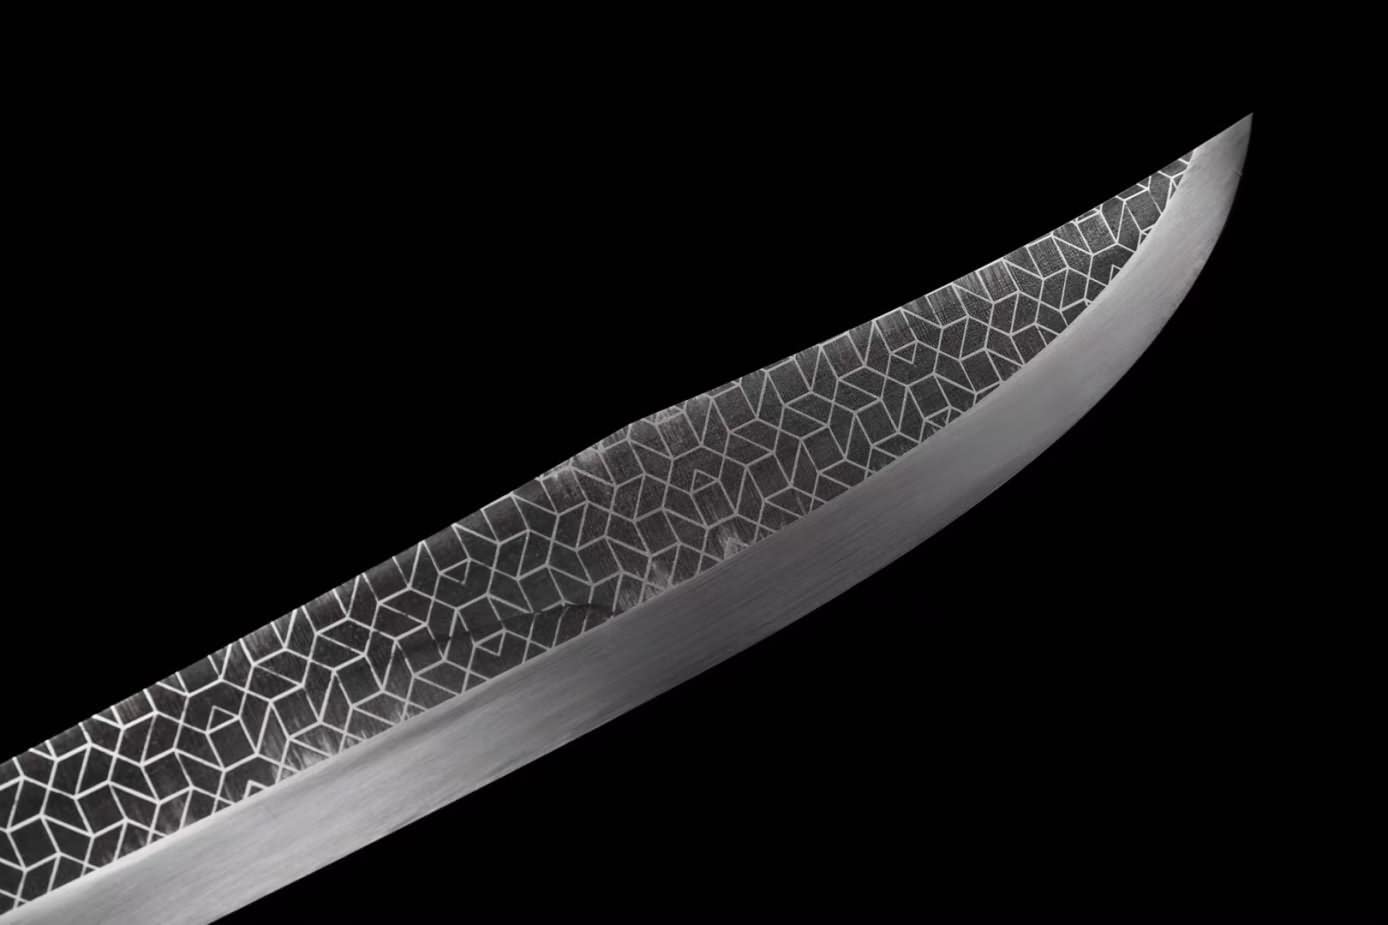 Machete,Saber Real High Carbon Steel Etched Blade,Alloy Fittings,PU Leather Scabbard